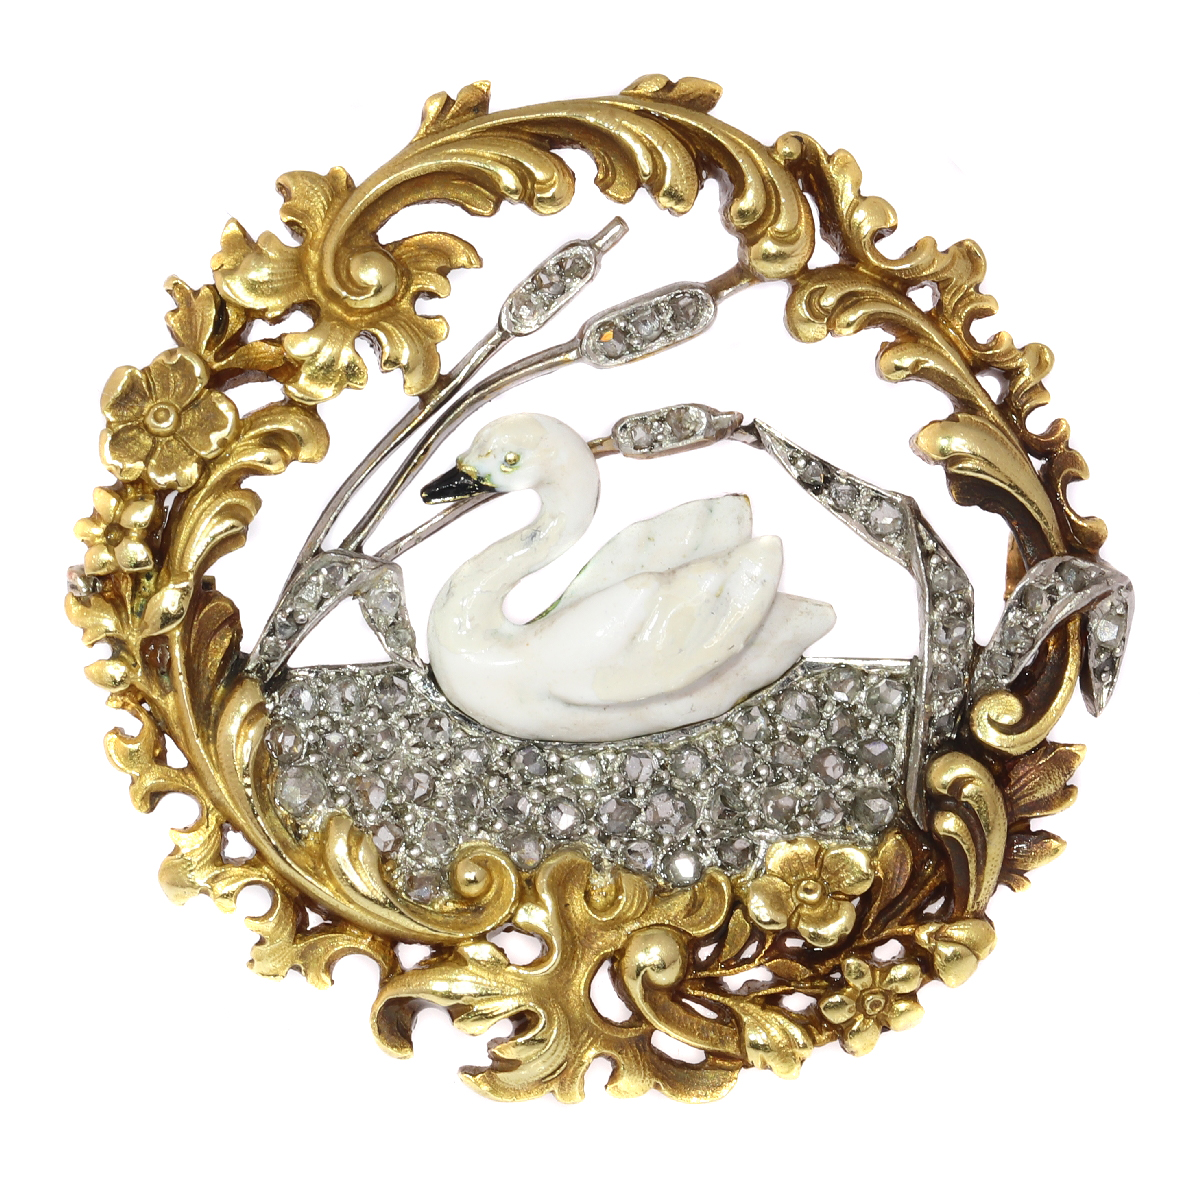 Late Victorian, early Art Nouveau French brooch enameled swan on diamond lake